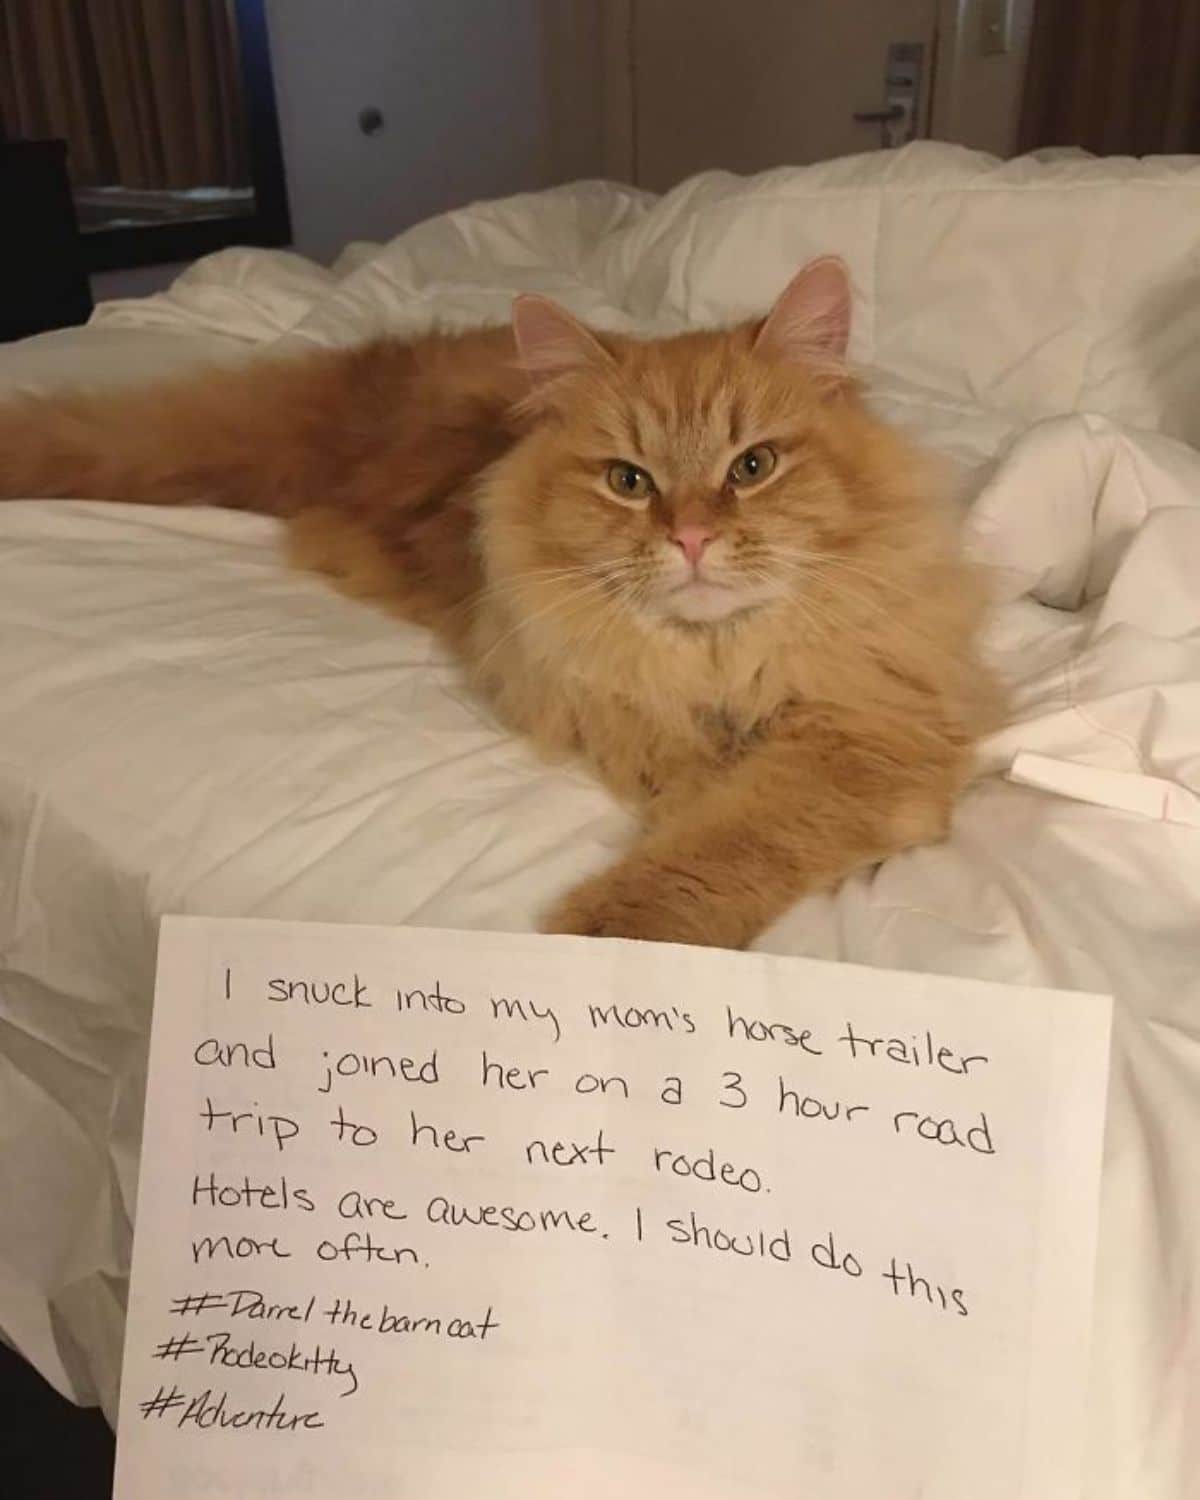 fluffy orange cat laying on a white bed with a note saying he snuck into mum's trailer and got to stay at a hotel